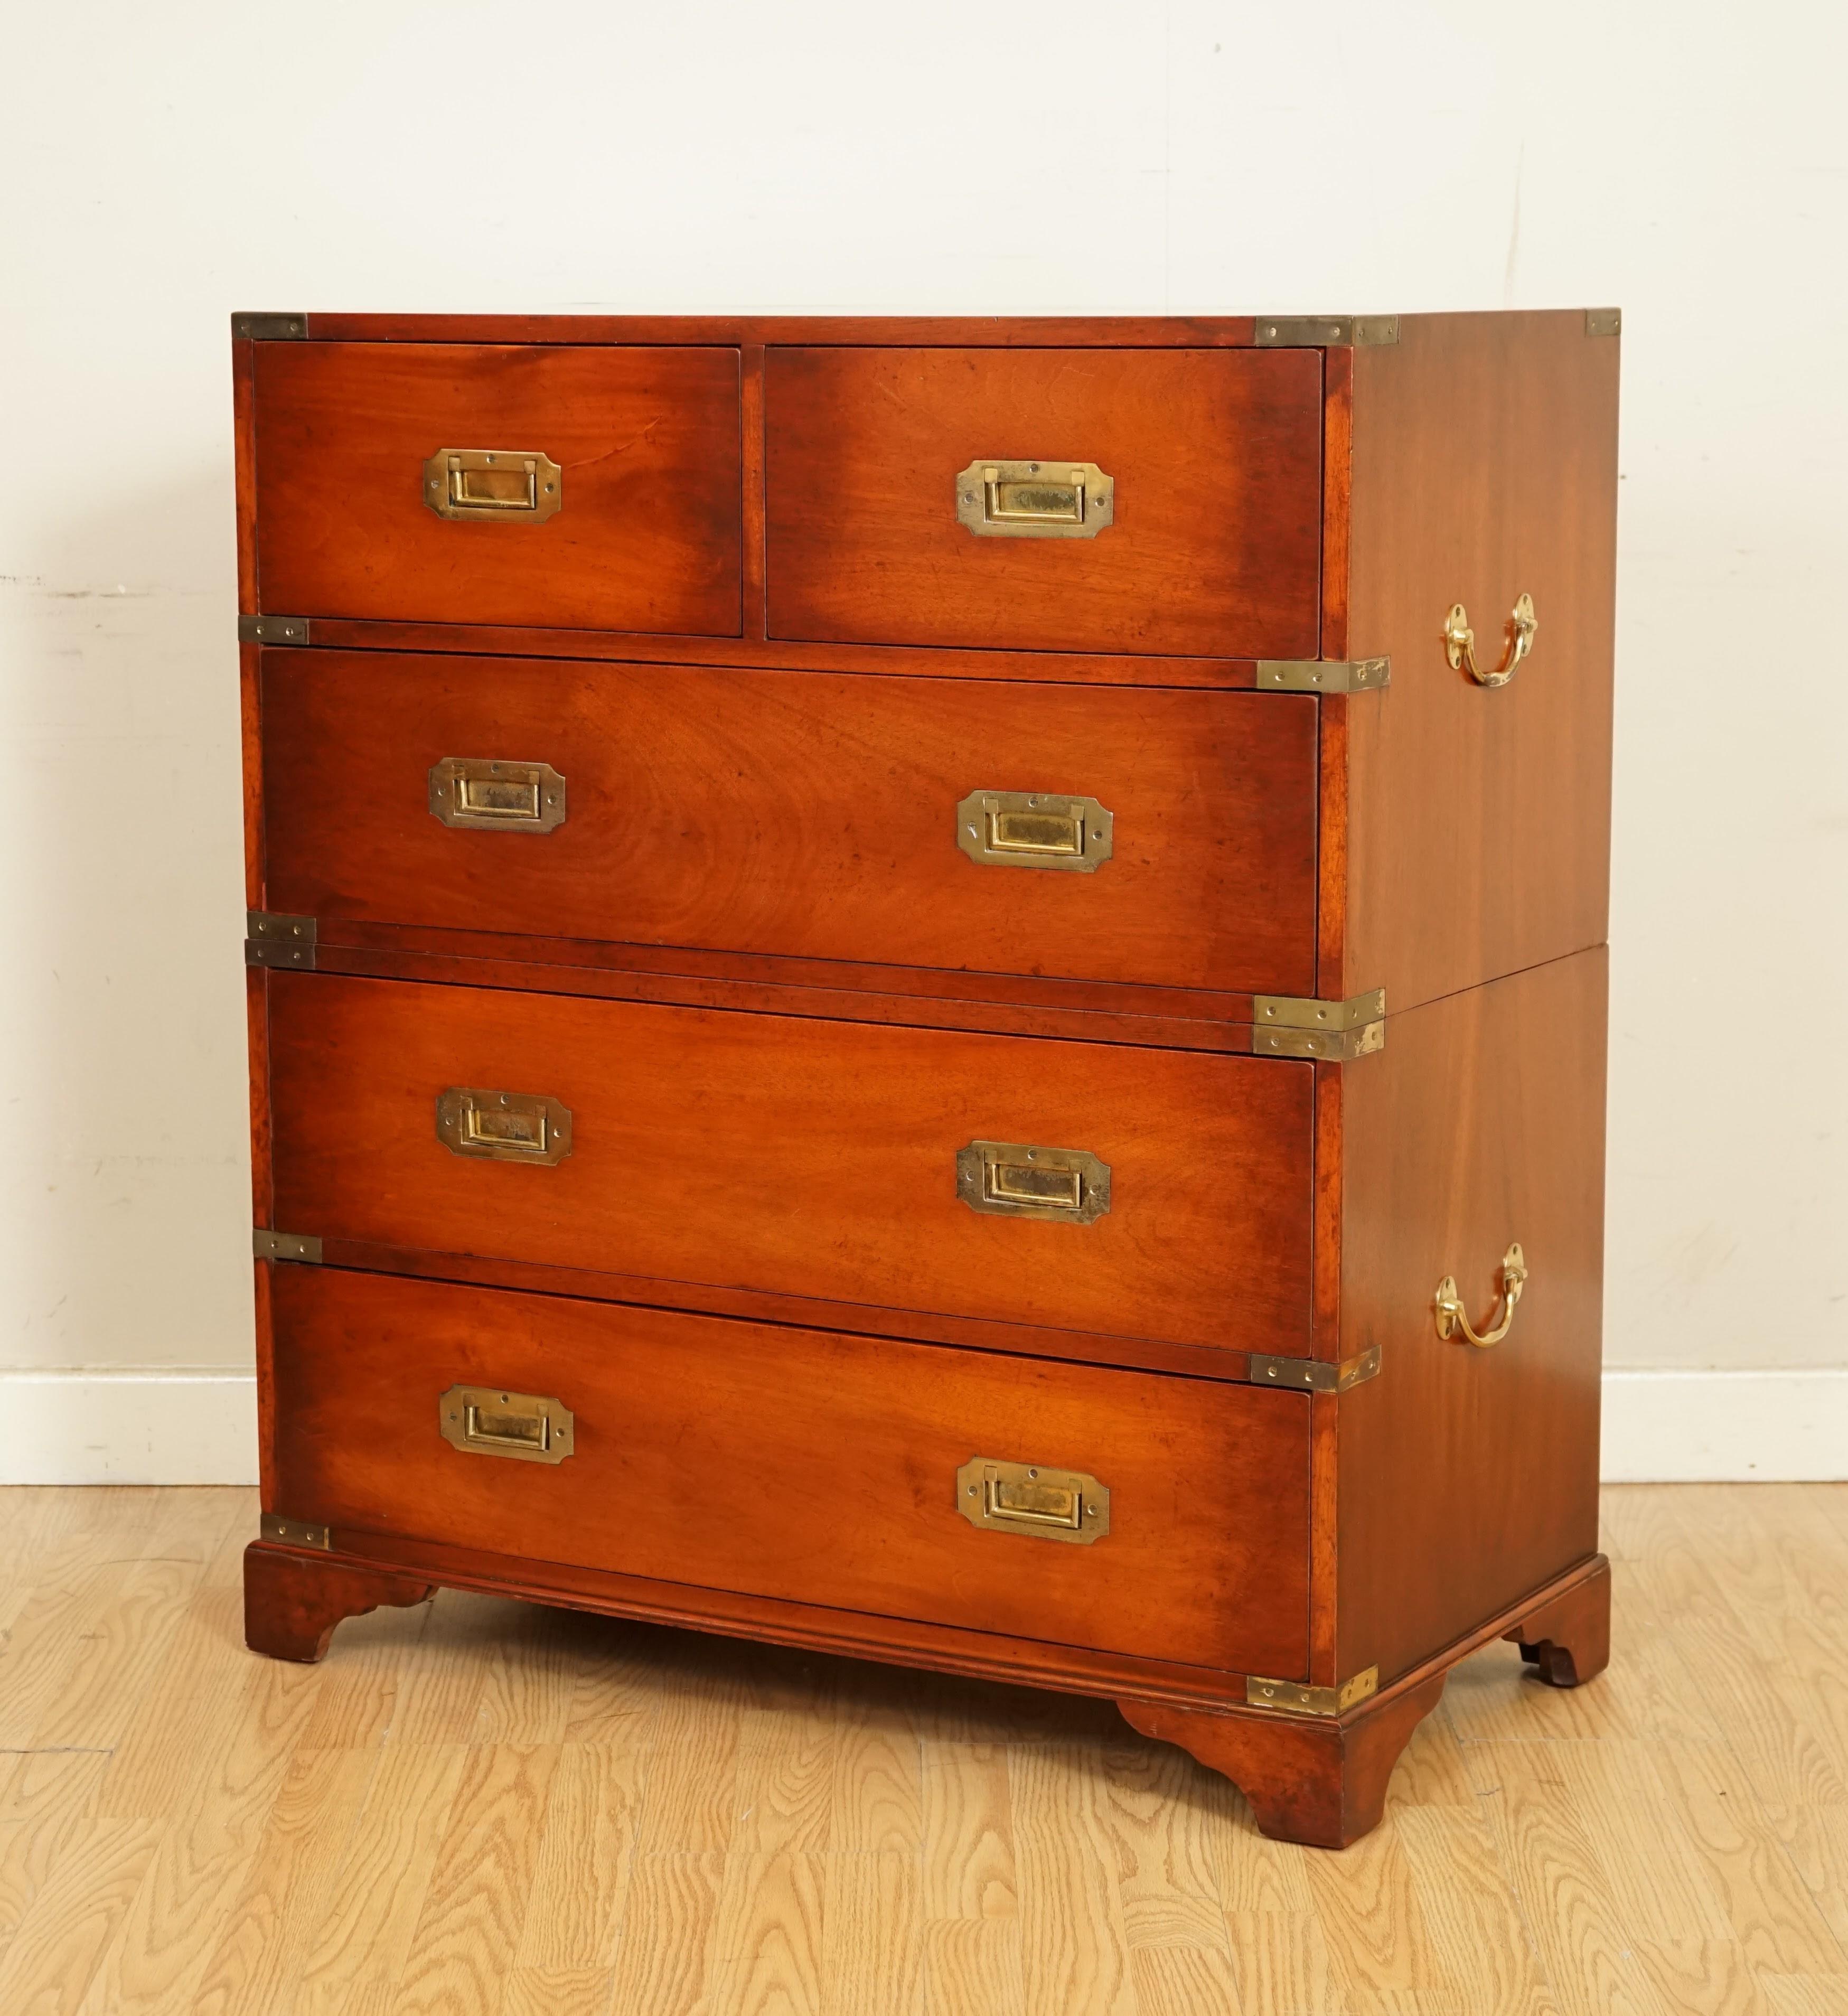 British Lovely Vintage Military Campaign Chest of Drawers Brass Fittings